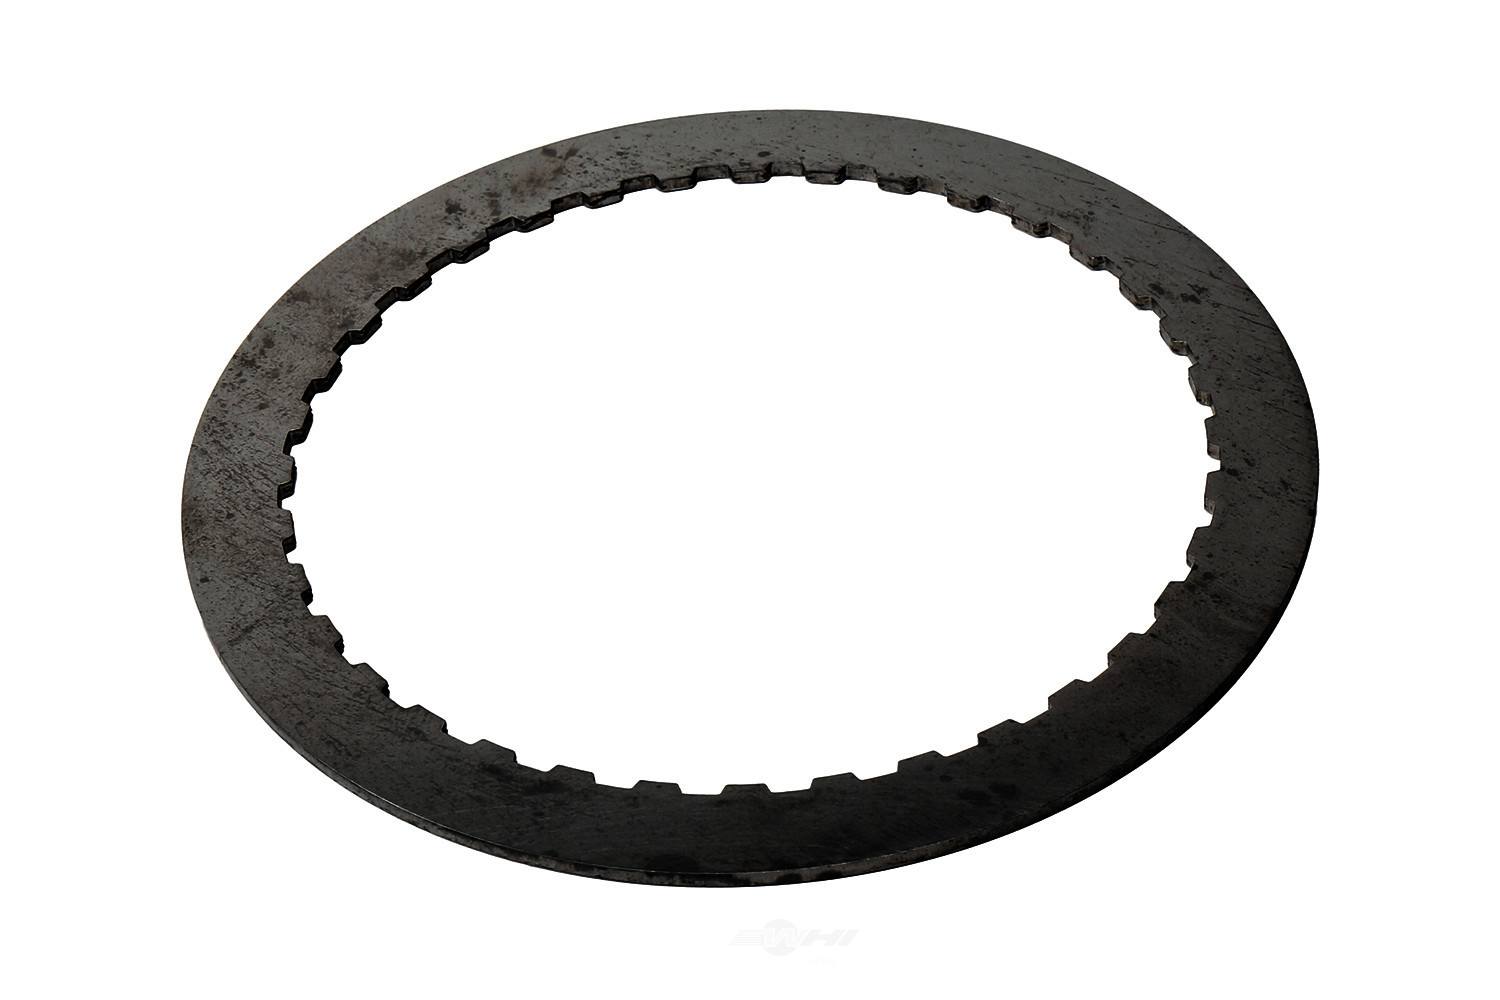 GM GENUINE PARTS - Transmission Clutch Friction Plate - GMP 24258069